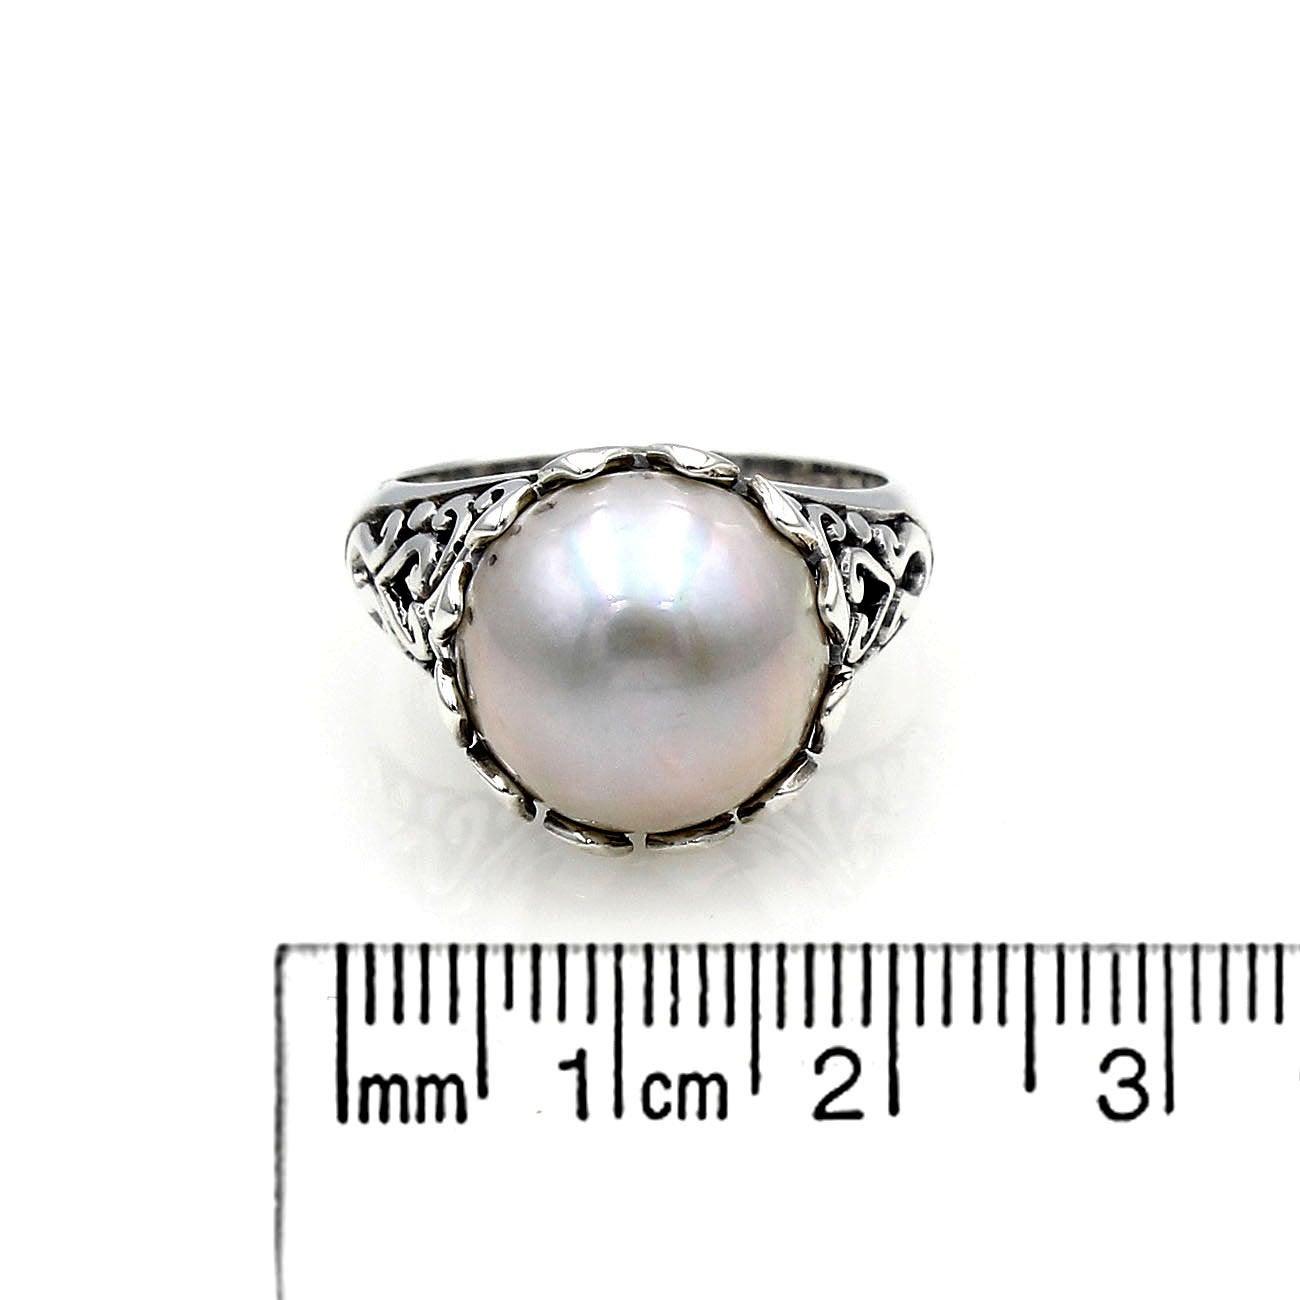 Handmade Victorian Mabe Fresh Water Pearl Cocktail Ring in 925 Sterling Silver - Size L , M , N , O , P , Q - Inspiring Jewellery